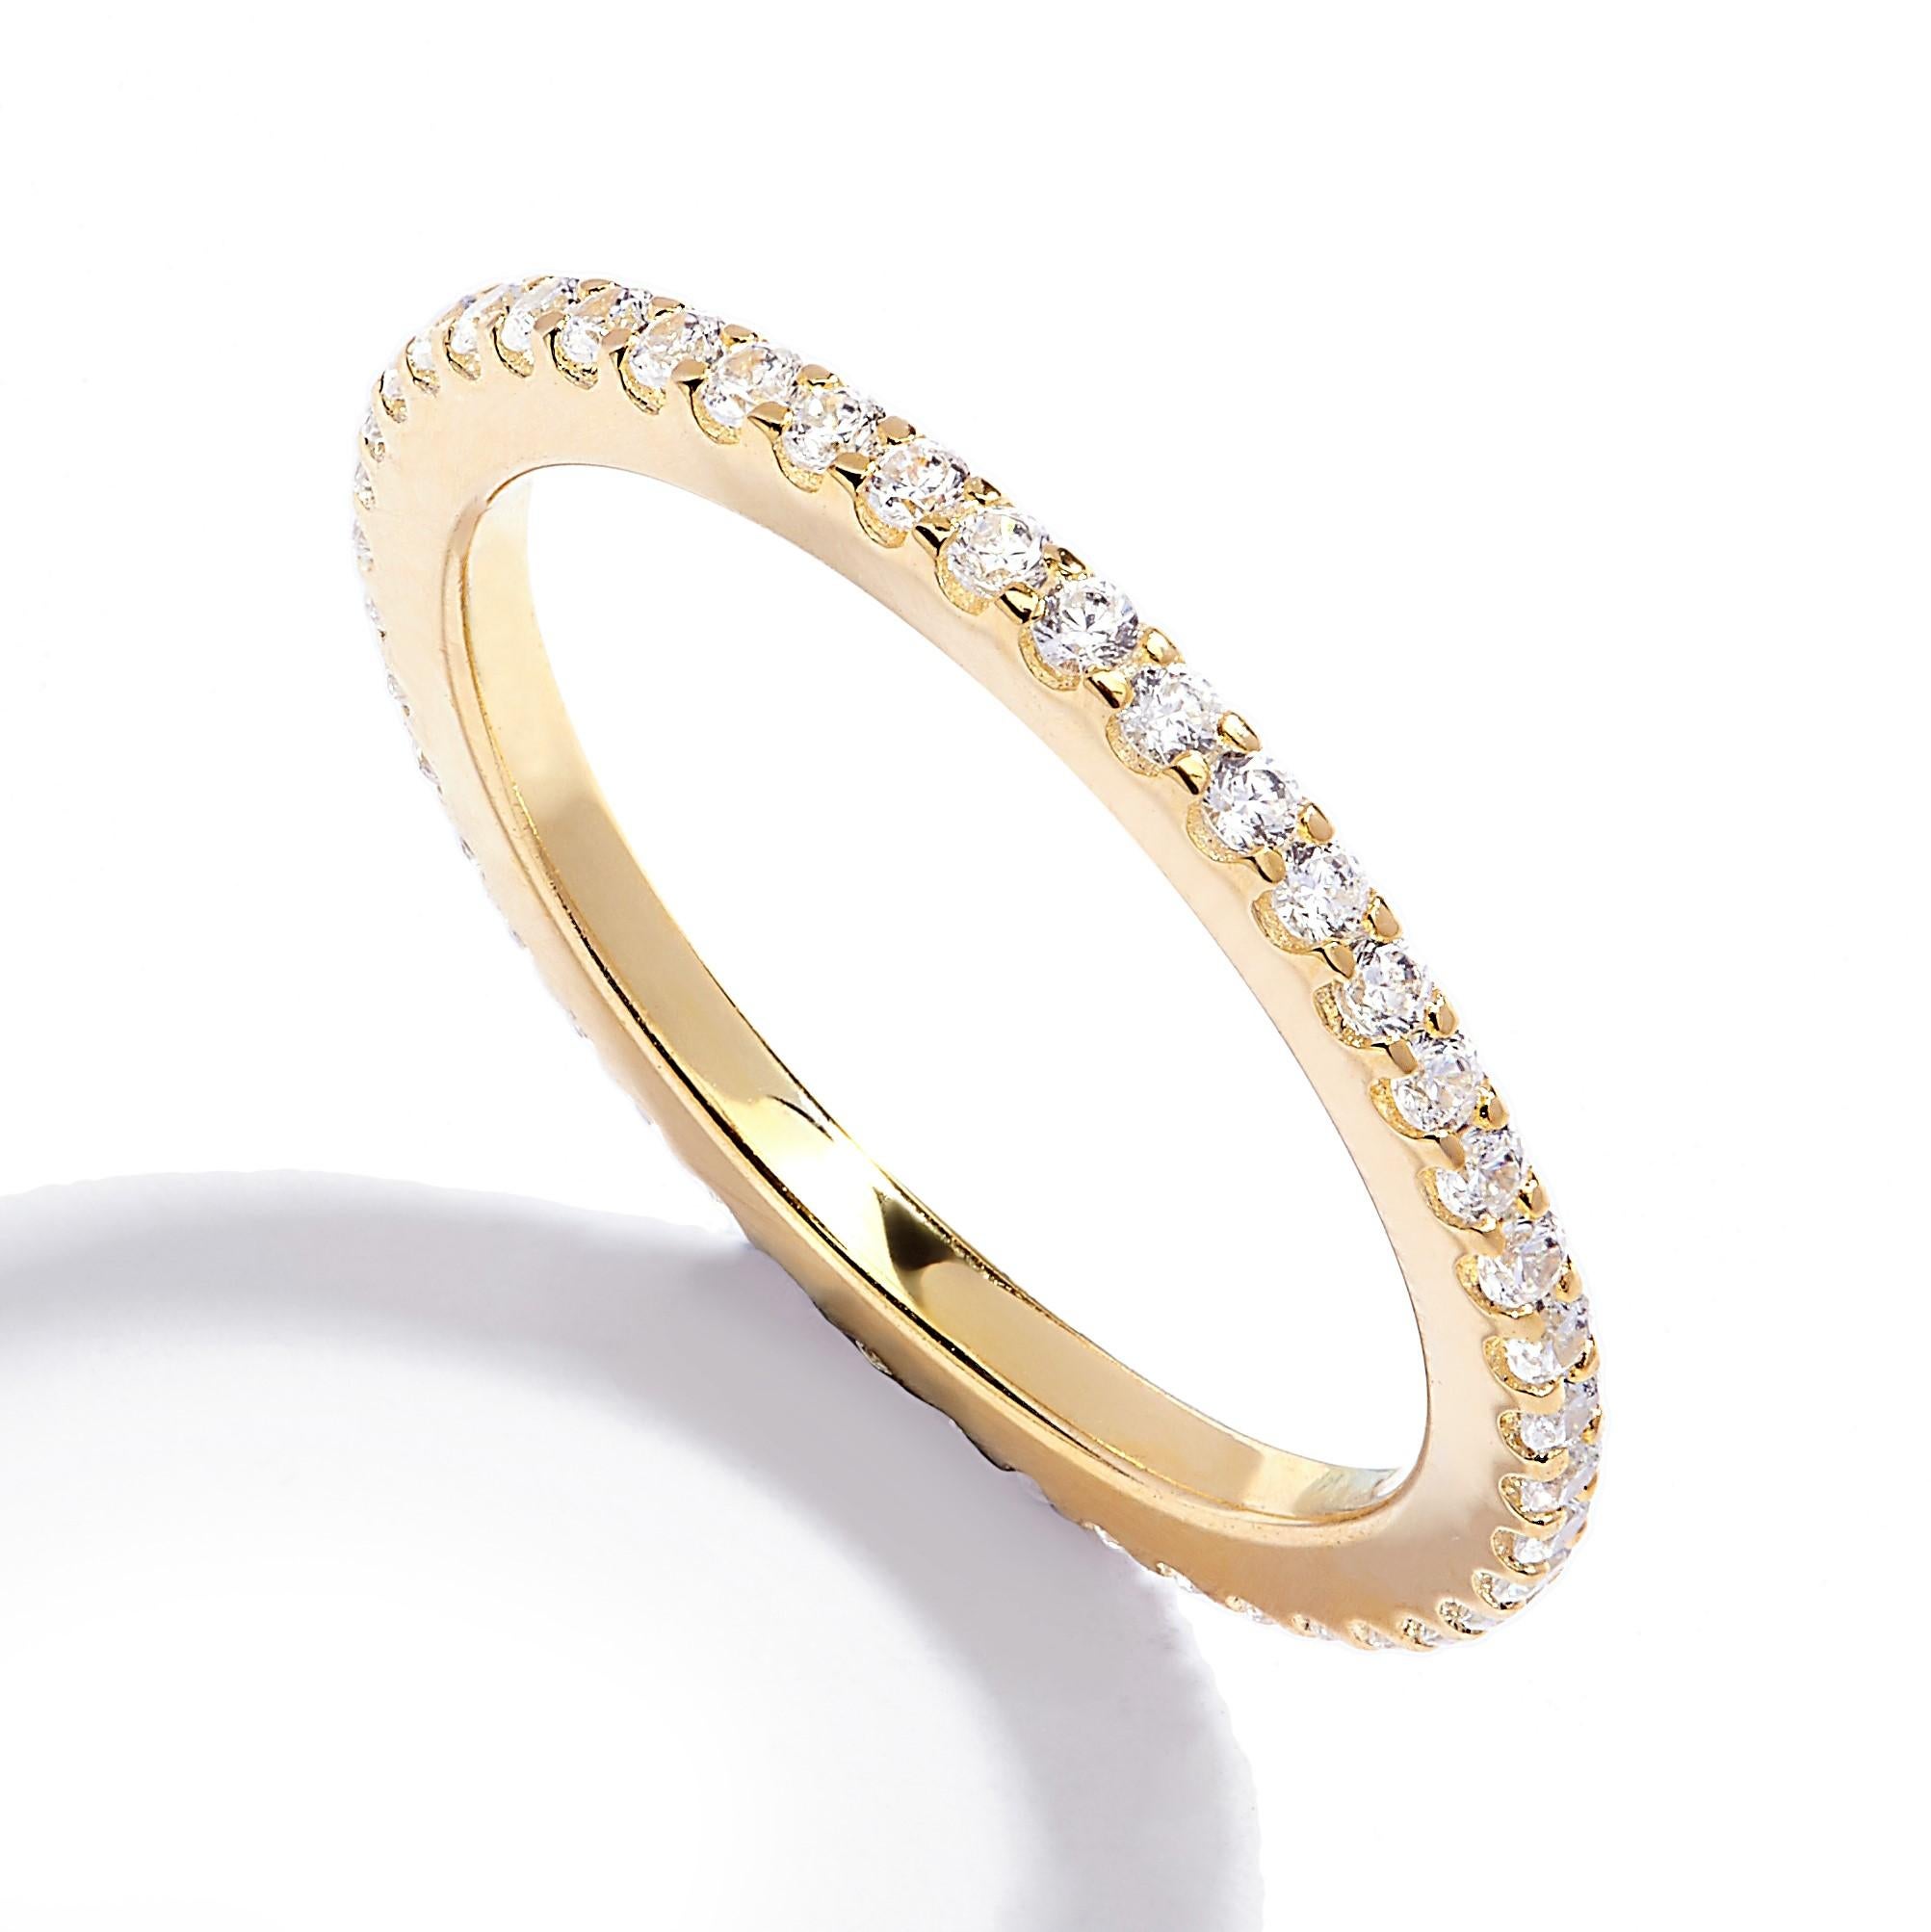 Three of our best-selling timeless full eternity rings in rhodium, rose gold or yellow gold plating, wear one, two or three together for an on-trend stacked look.

A beautifully classic ring that's comfortable and so easy to wear.

Featuring 0.85ct